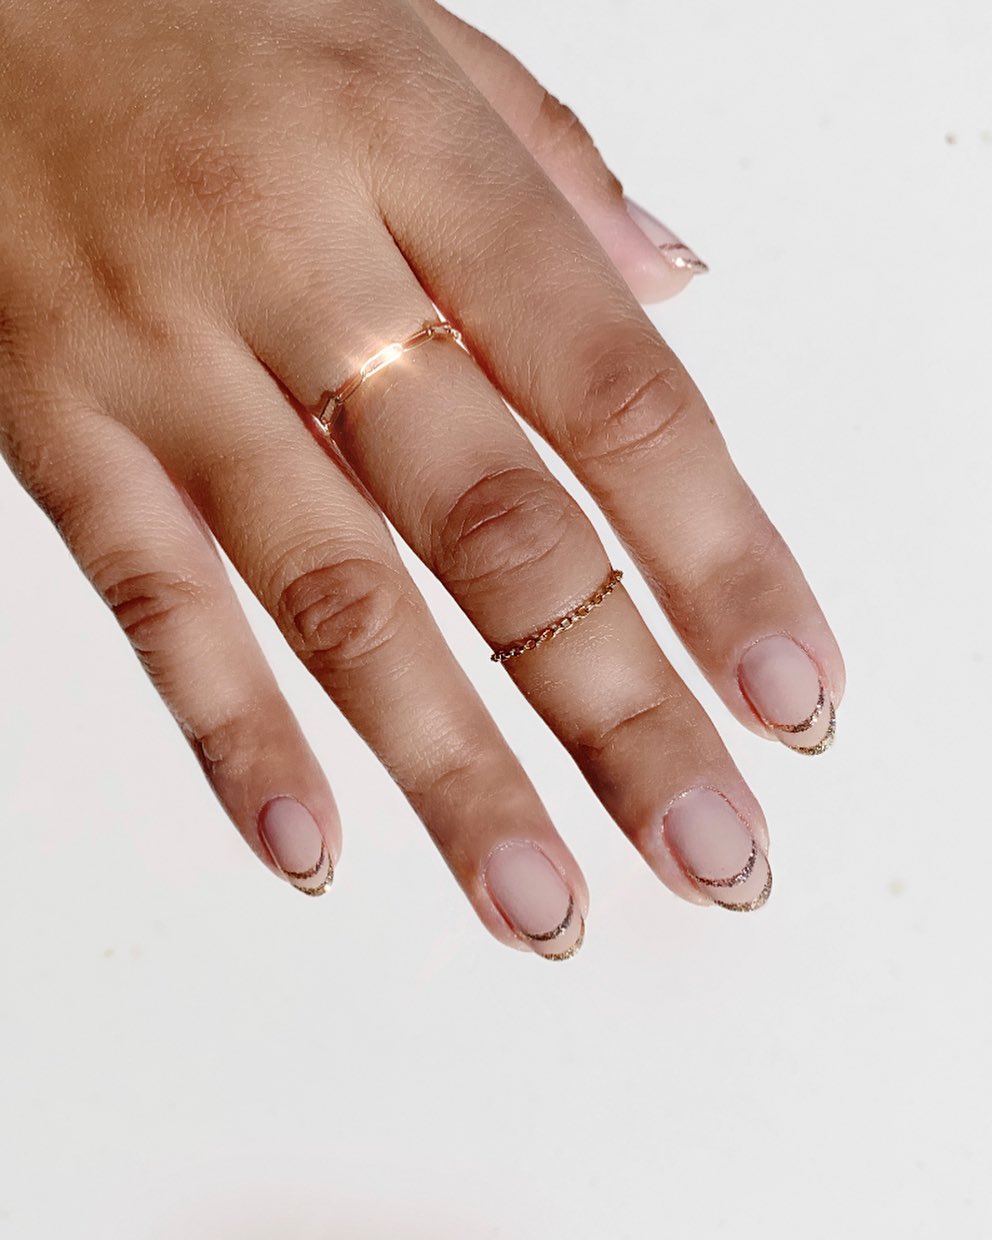 How to Grow Nails Fast: The 16 Best Products on Amazon | Who What Wear